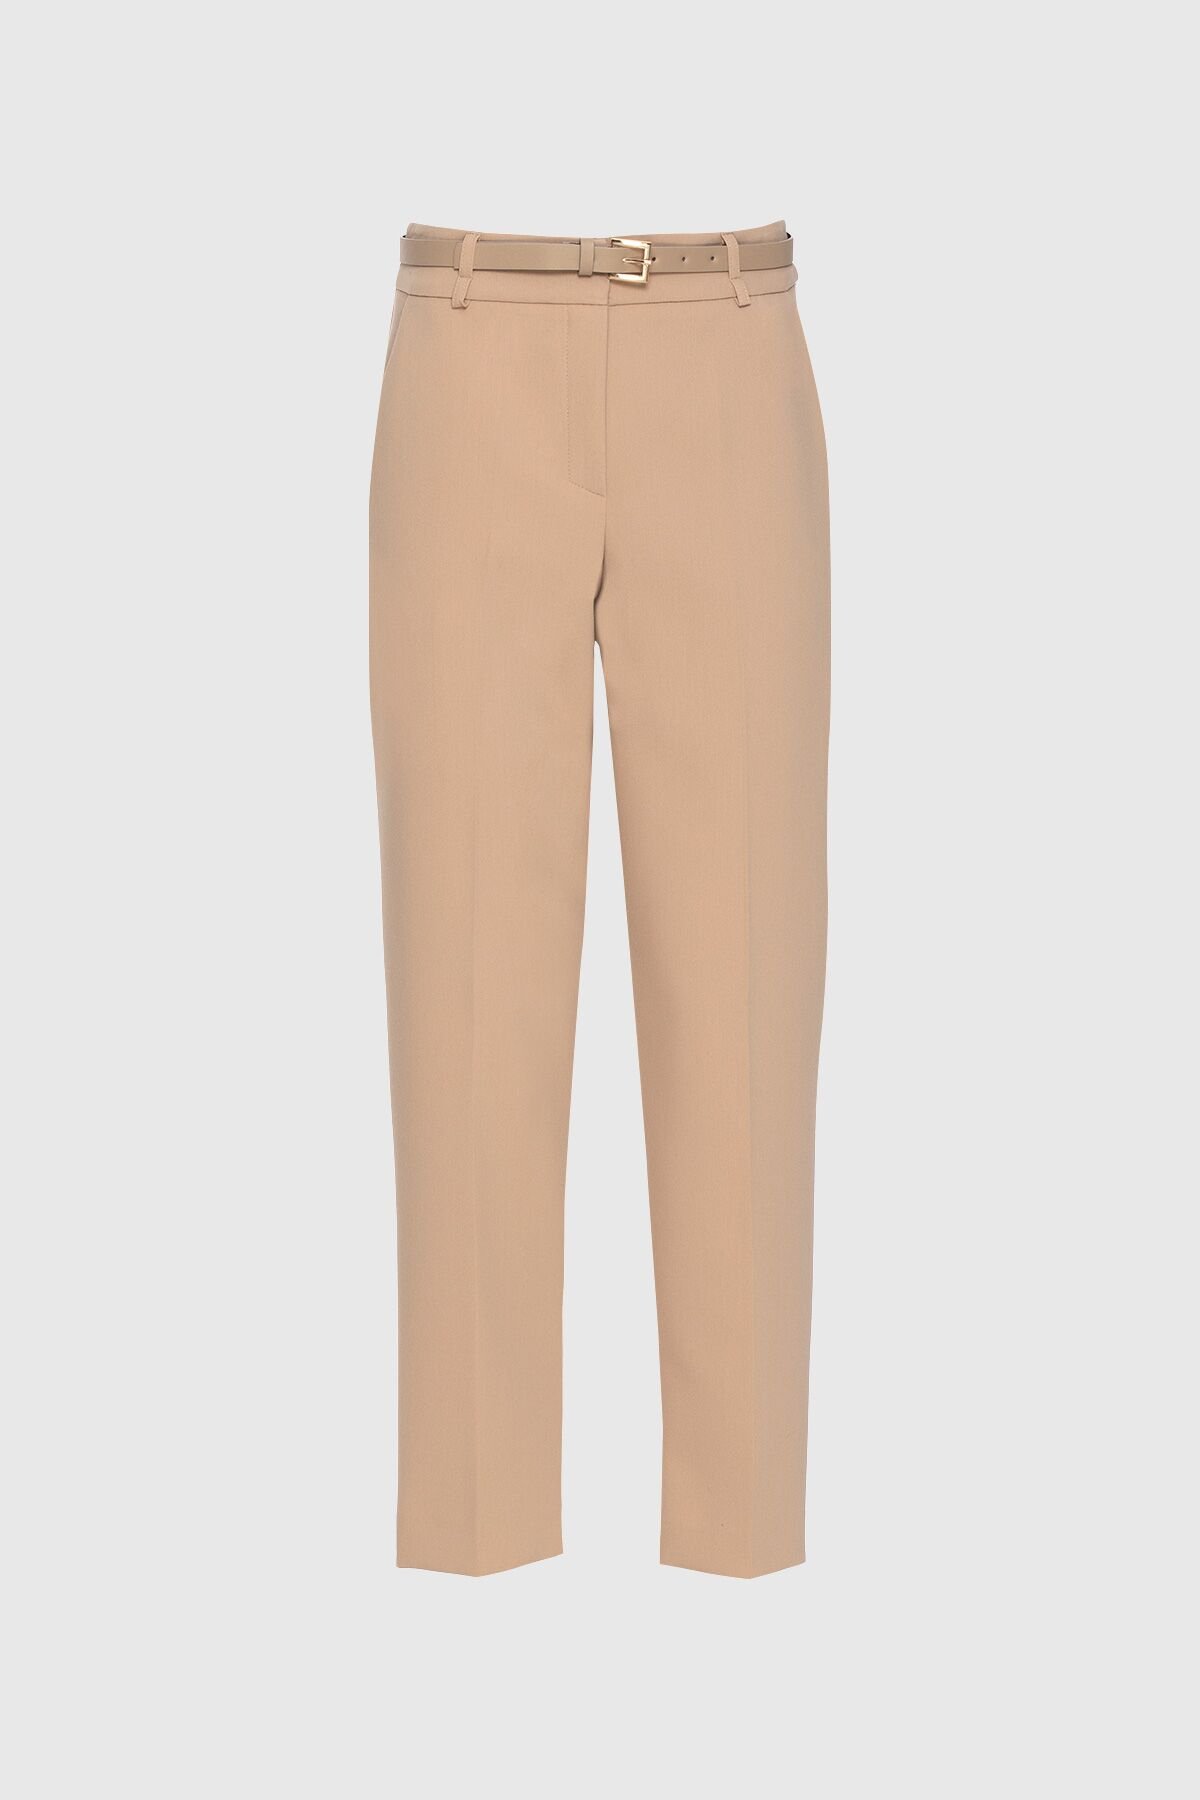 Buy PATRORNA Womens Slim Fit CarrotCigarette Trousers PT8A34OrangeXS  at Amazonin